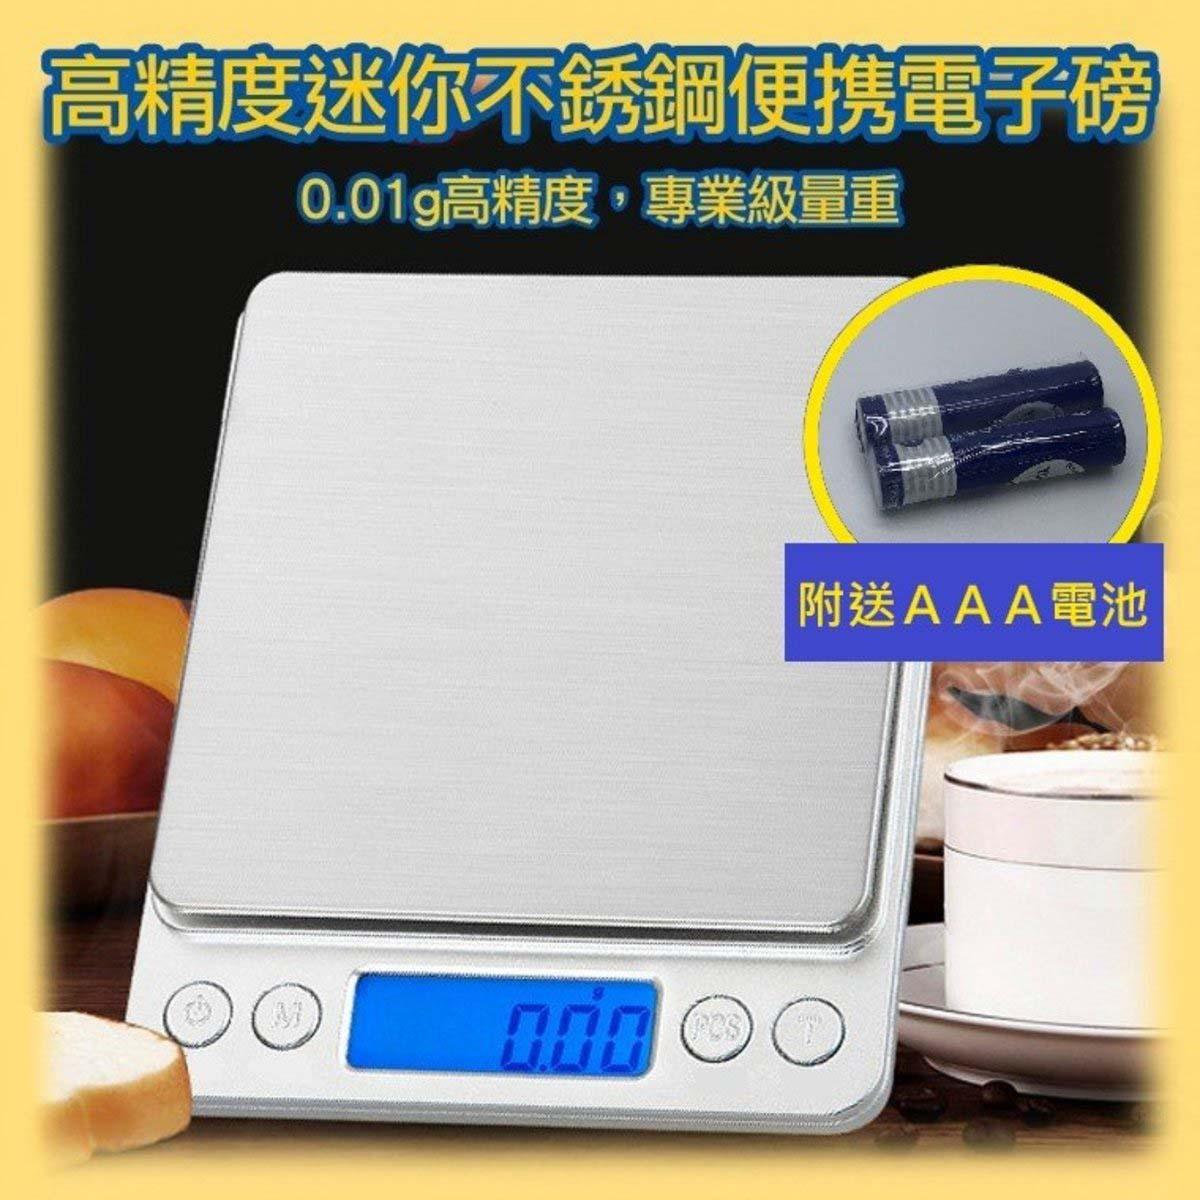 High Precision Digital Kitchen Scale Capacity (1000g / 0.1g) Electronic Cooking Food Scale with LCD